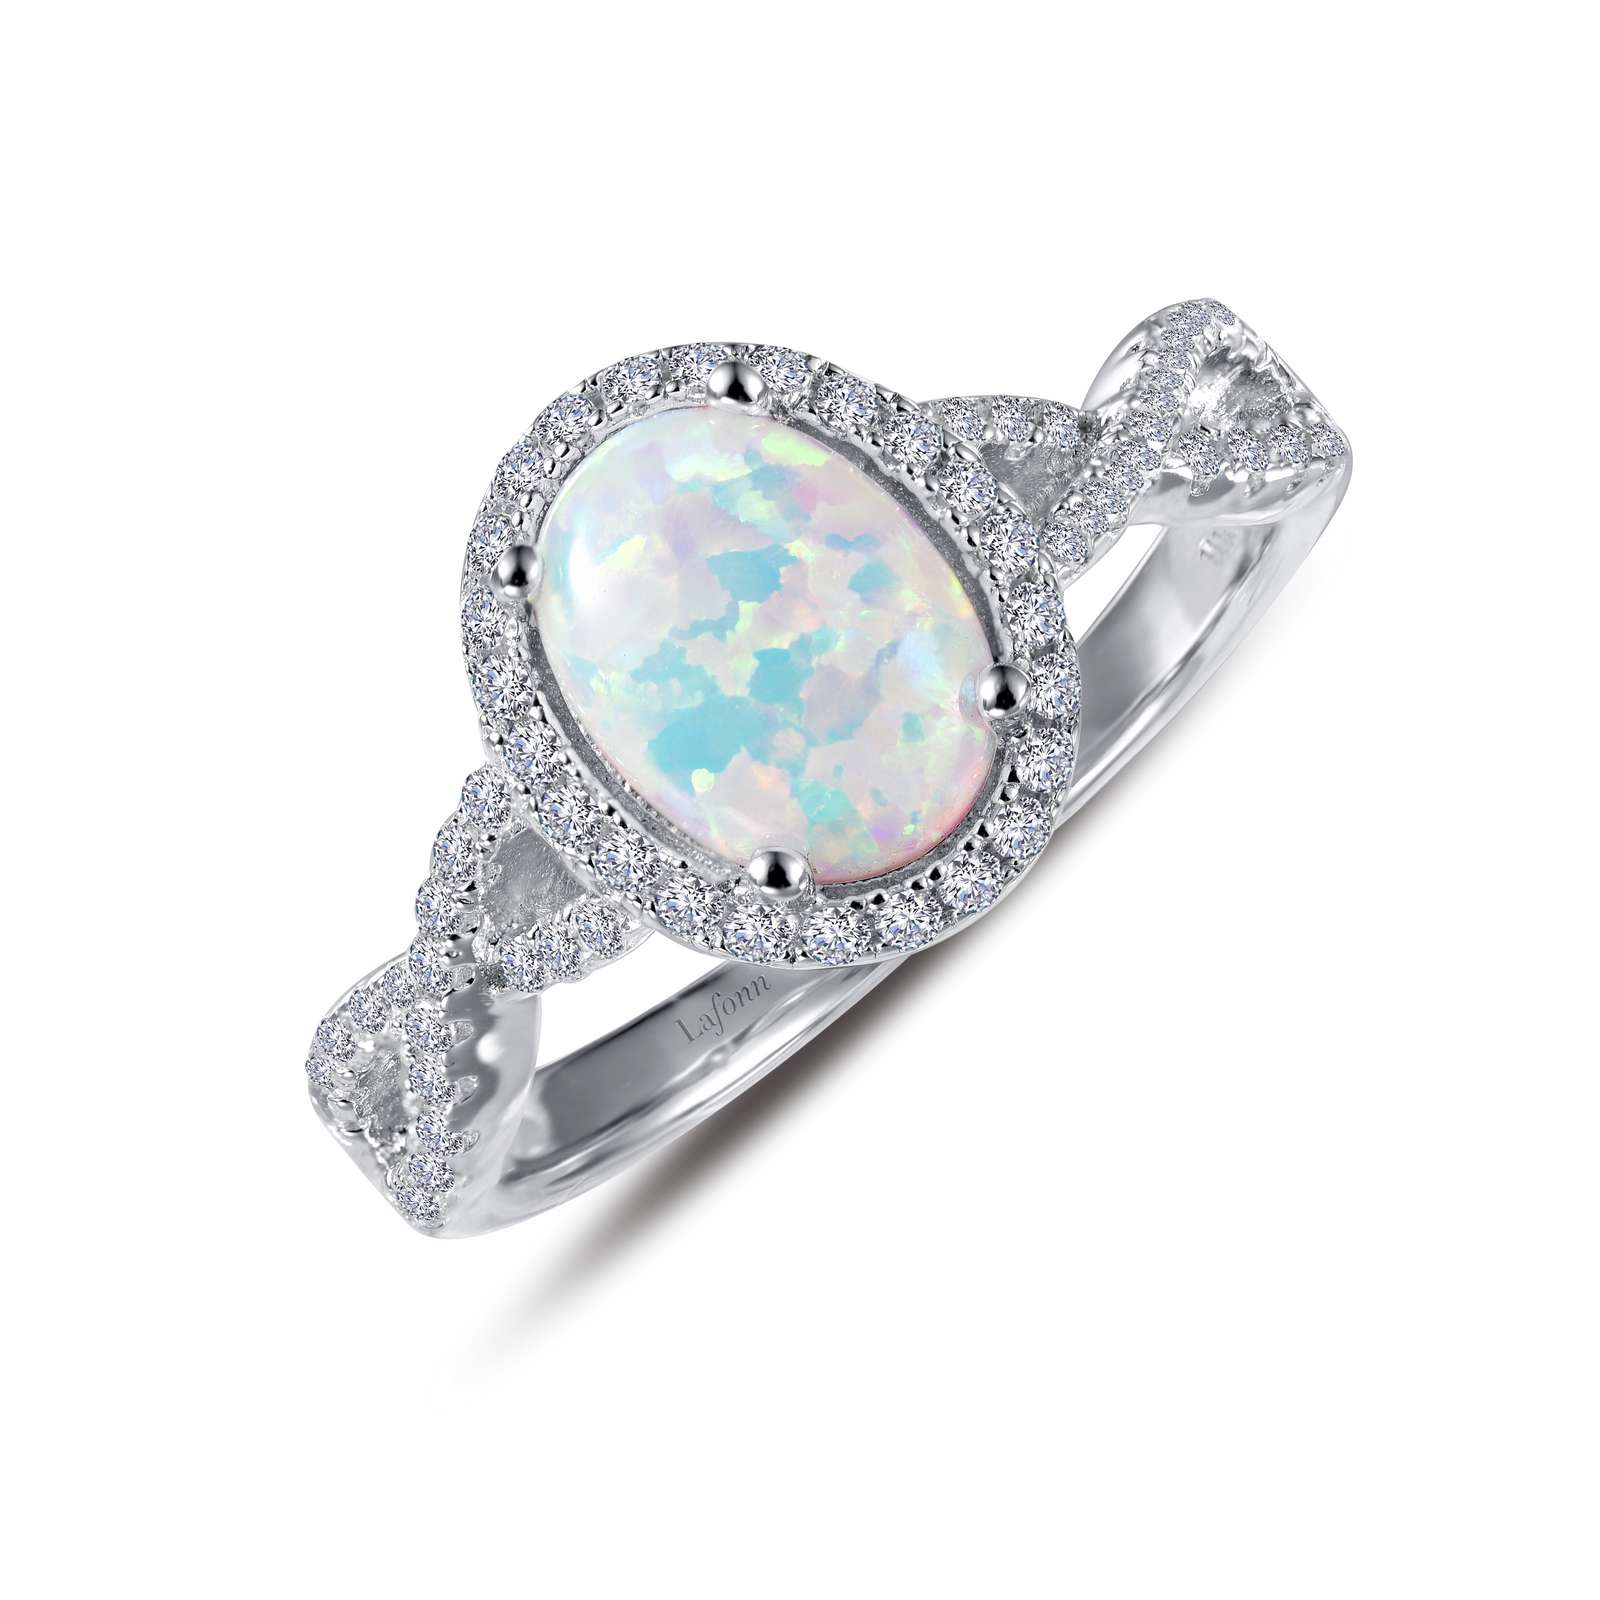 Halo Engagement Ring - Inspired by the charm of the past, this simulated opal halo ring is set with Lafonn's signature Lassaire simulated diamonds in sterling silver bonded with platinum.